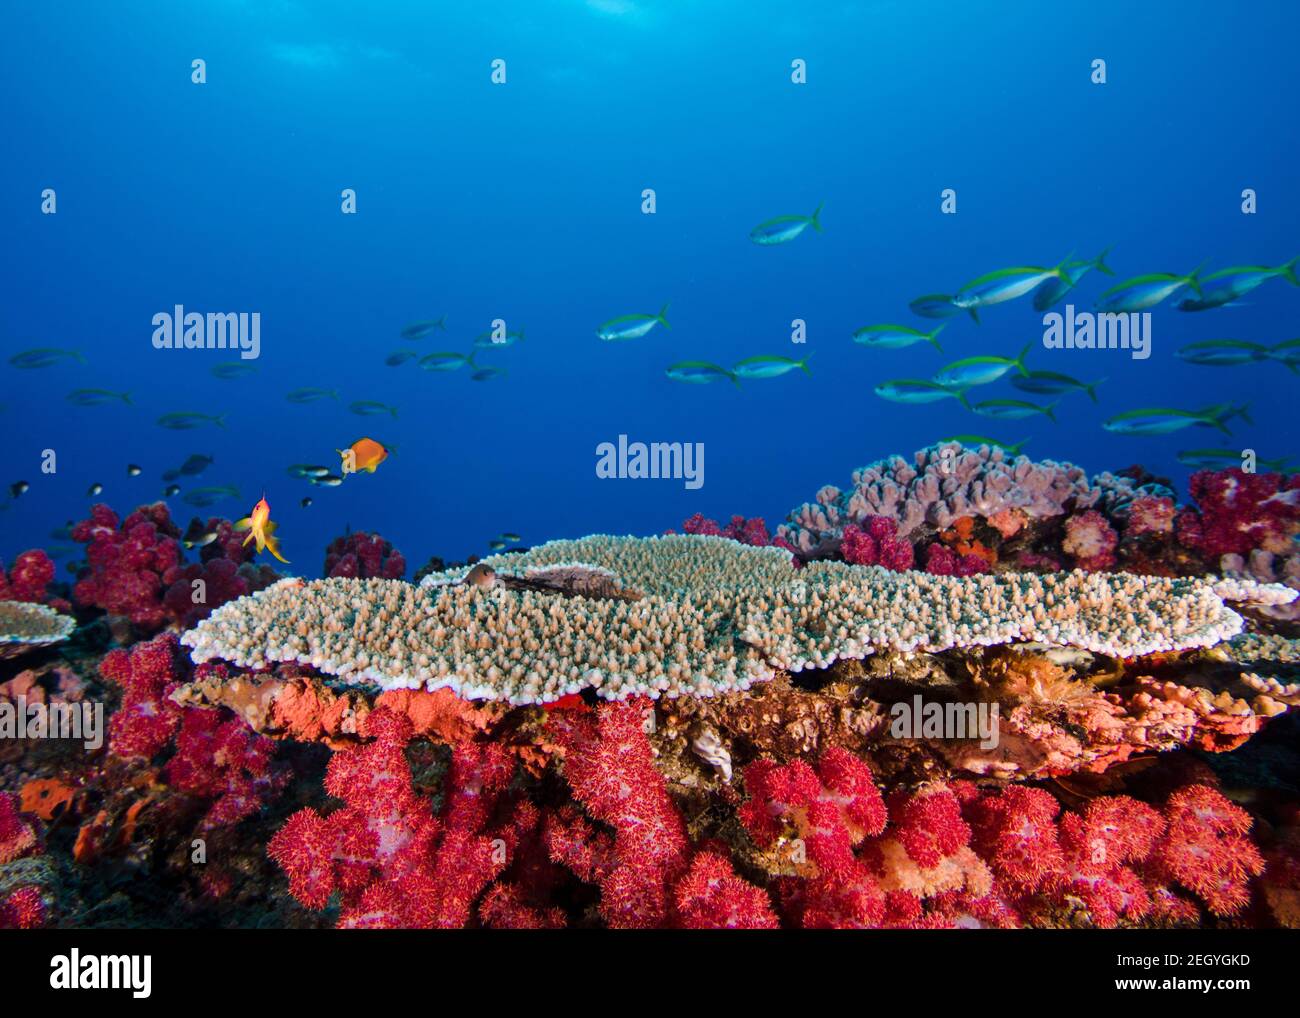 Bright coral reef scene of pink Thistle soft corals and Plate coral,  with some small fish swimming past in the background Stock Photo